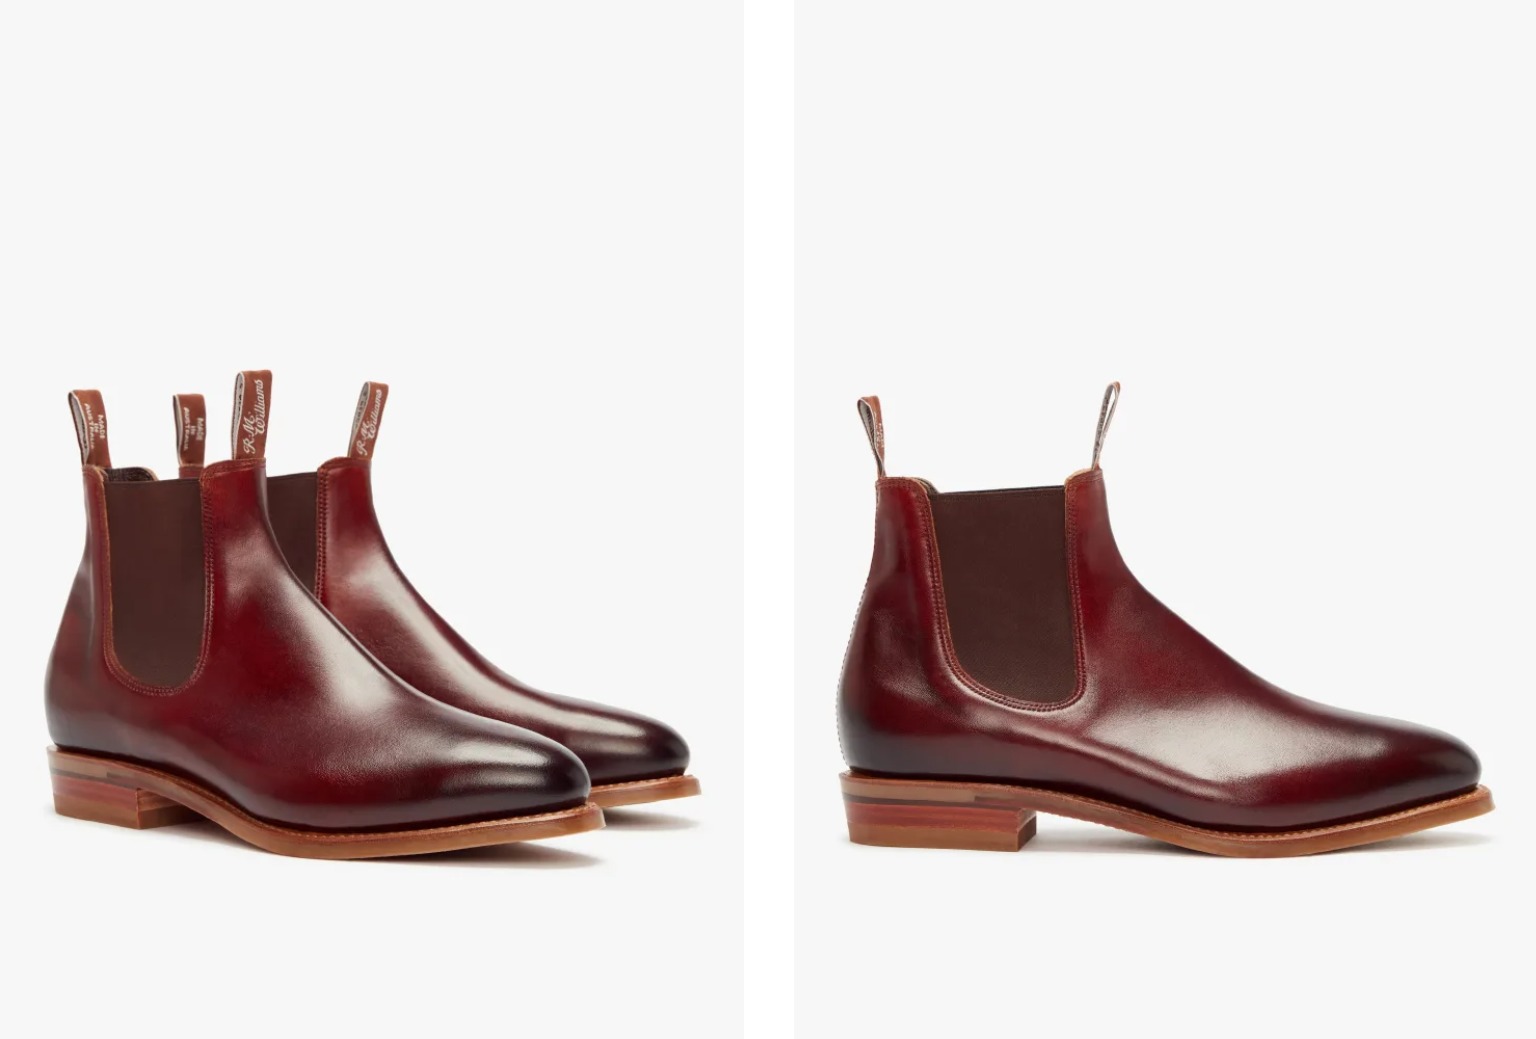 https://robbreport.com.au/application/assets/2023/05/robb-report_best-boots-for-men-2023_-rm-williams.jpg